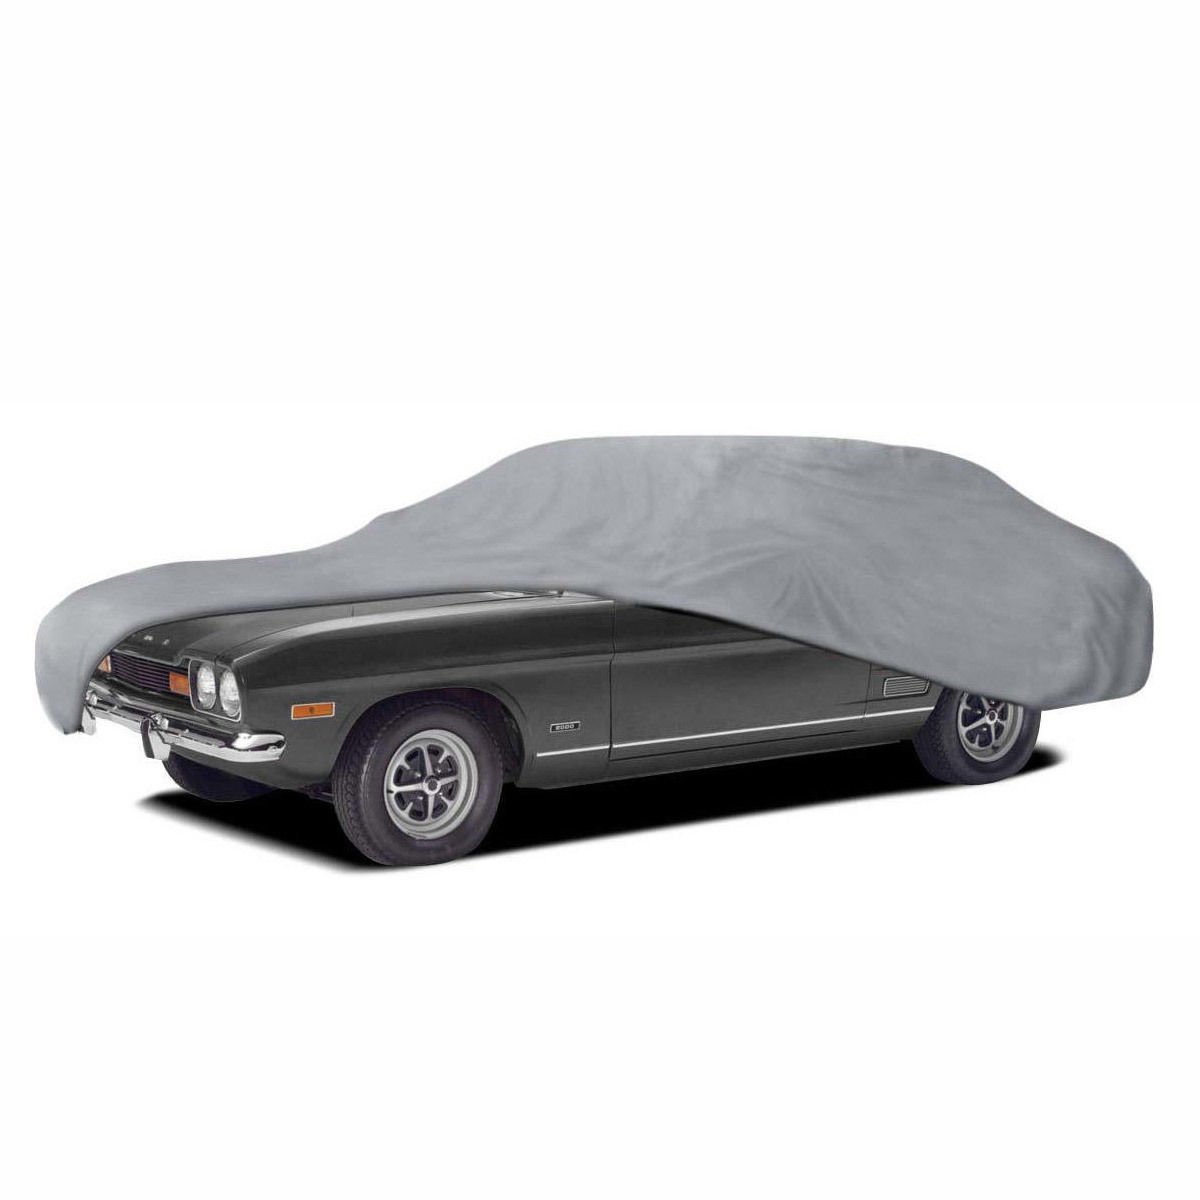 5 Layer Car Cover for Ford Capri Outdoor Waterproof Rain Sun Proof Breathable